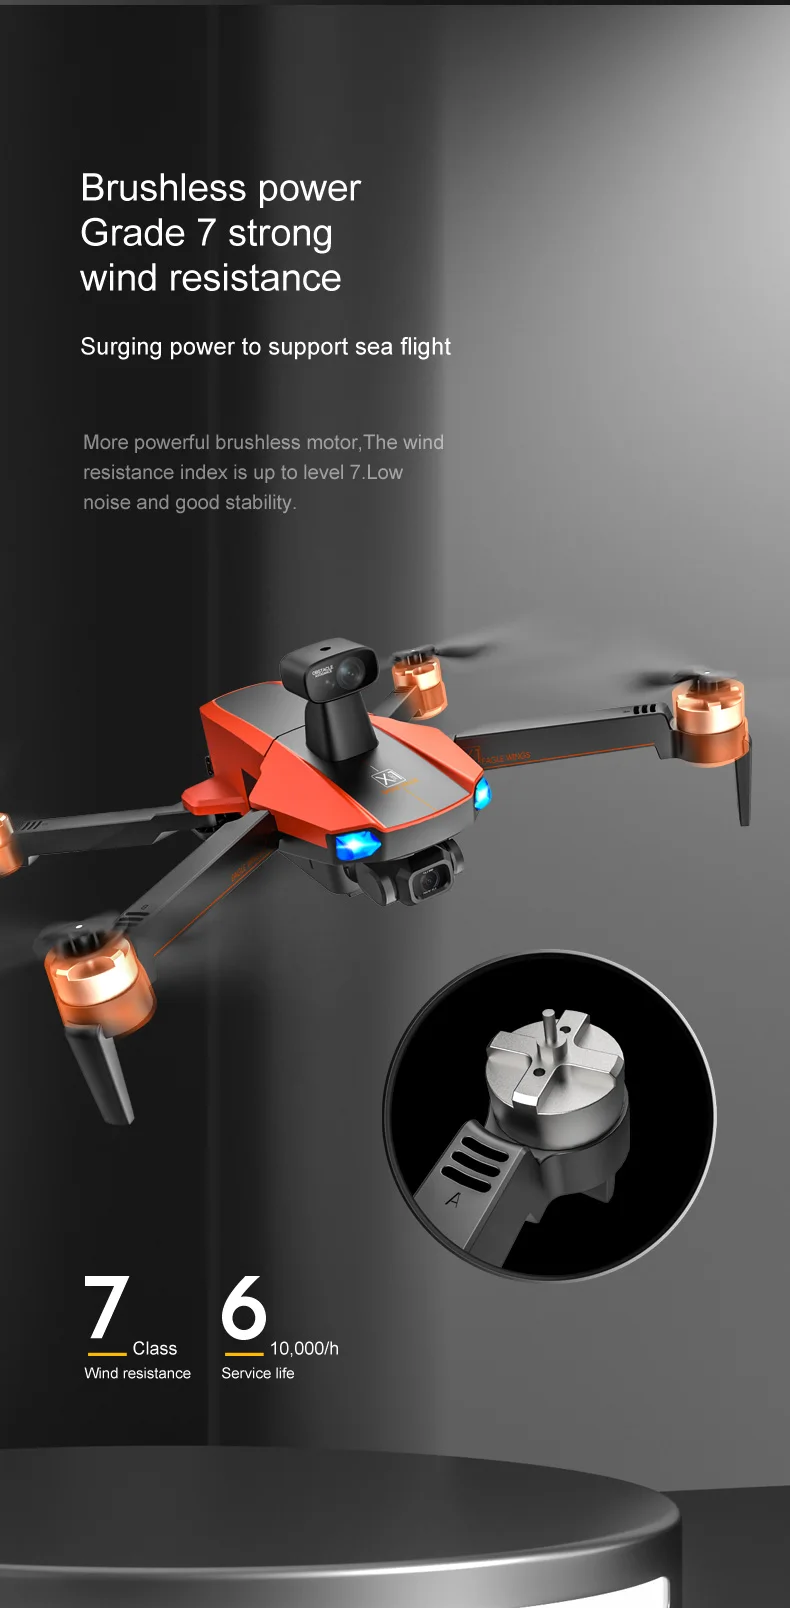 MS-712 Drone, Brushless power Grade 7 strong wind resistance Surging power to support sea flight More powerful brushless